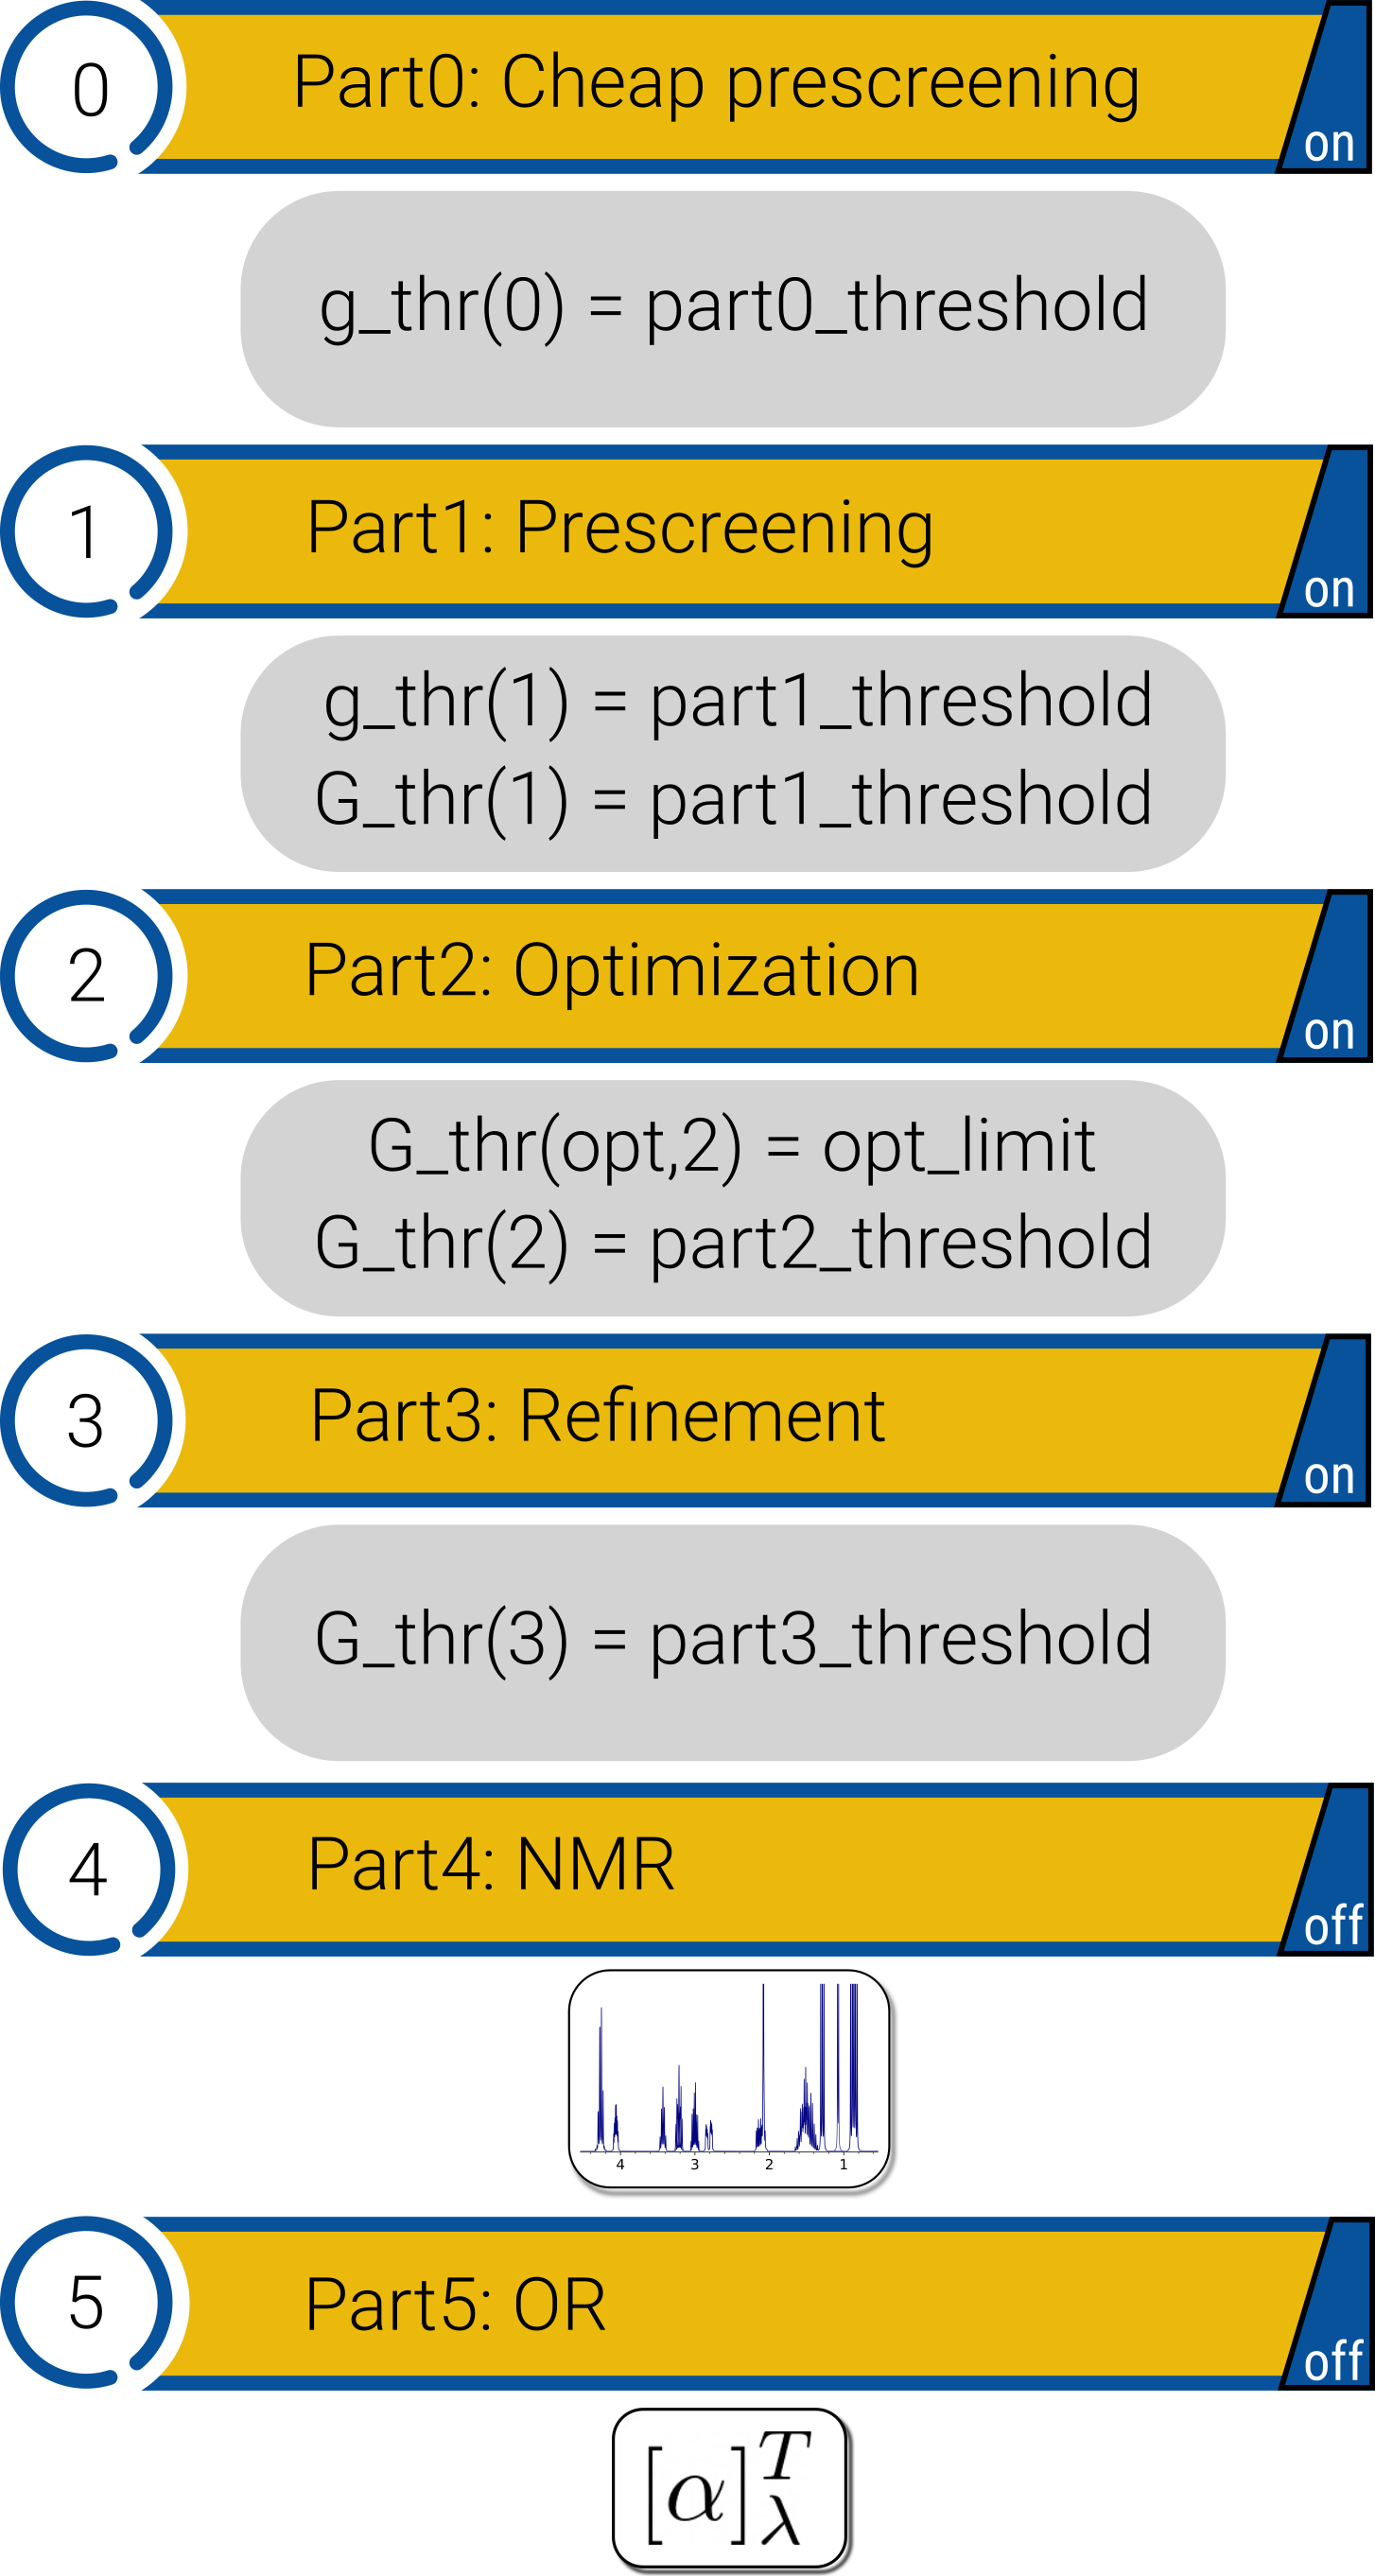 CENSO workflow with threshold information.